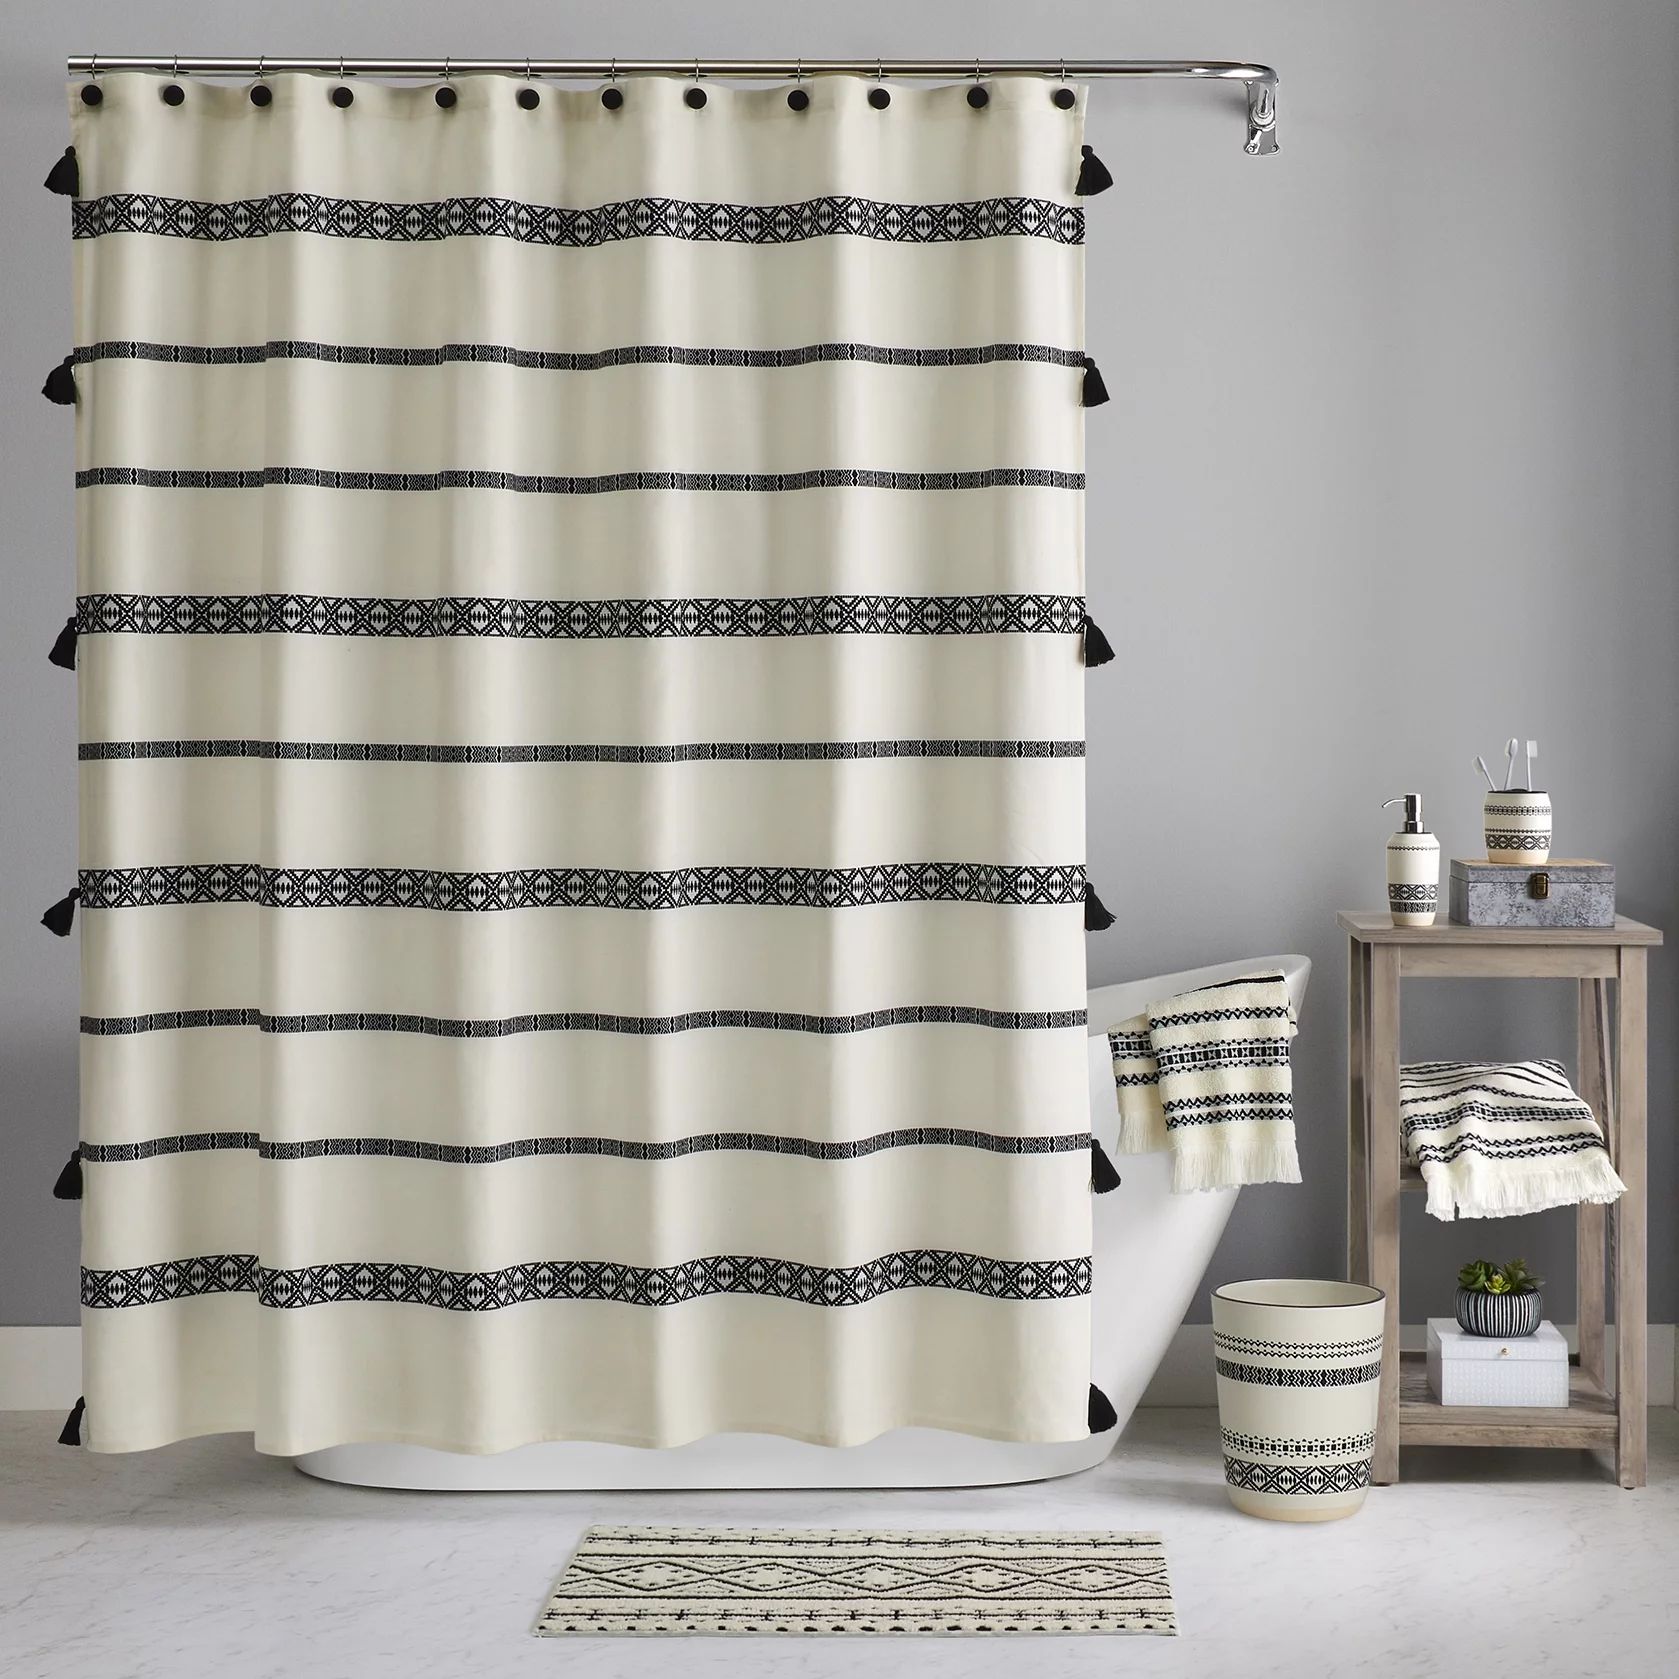 Boho Chic Polyester and Cotton Shower Curtain, Black, Better Homes & Gardens, 72" x 72" | Walmart (US)